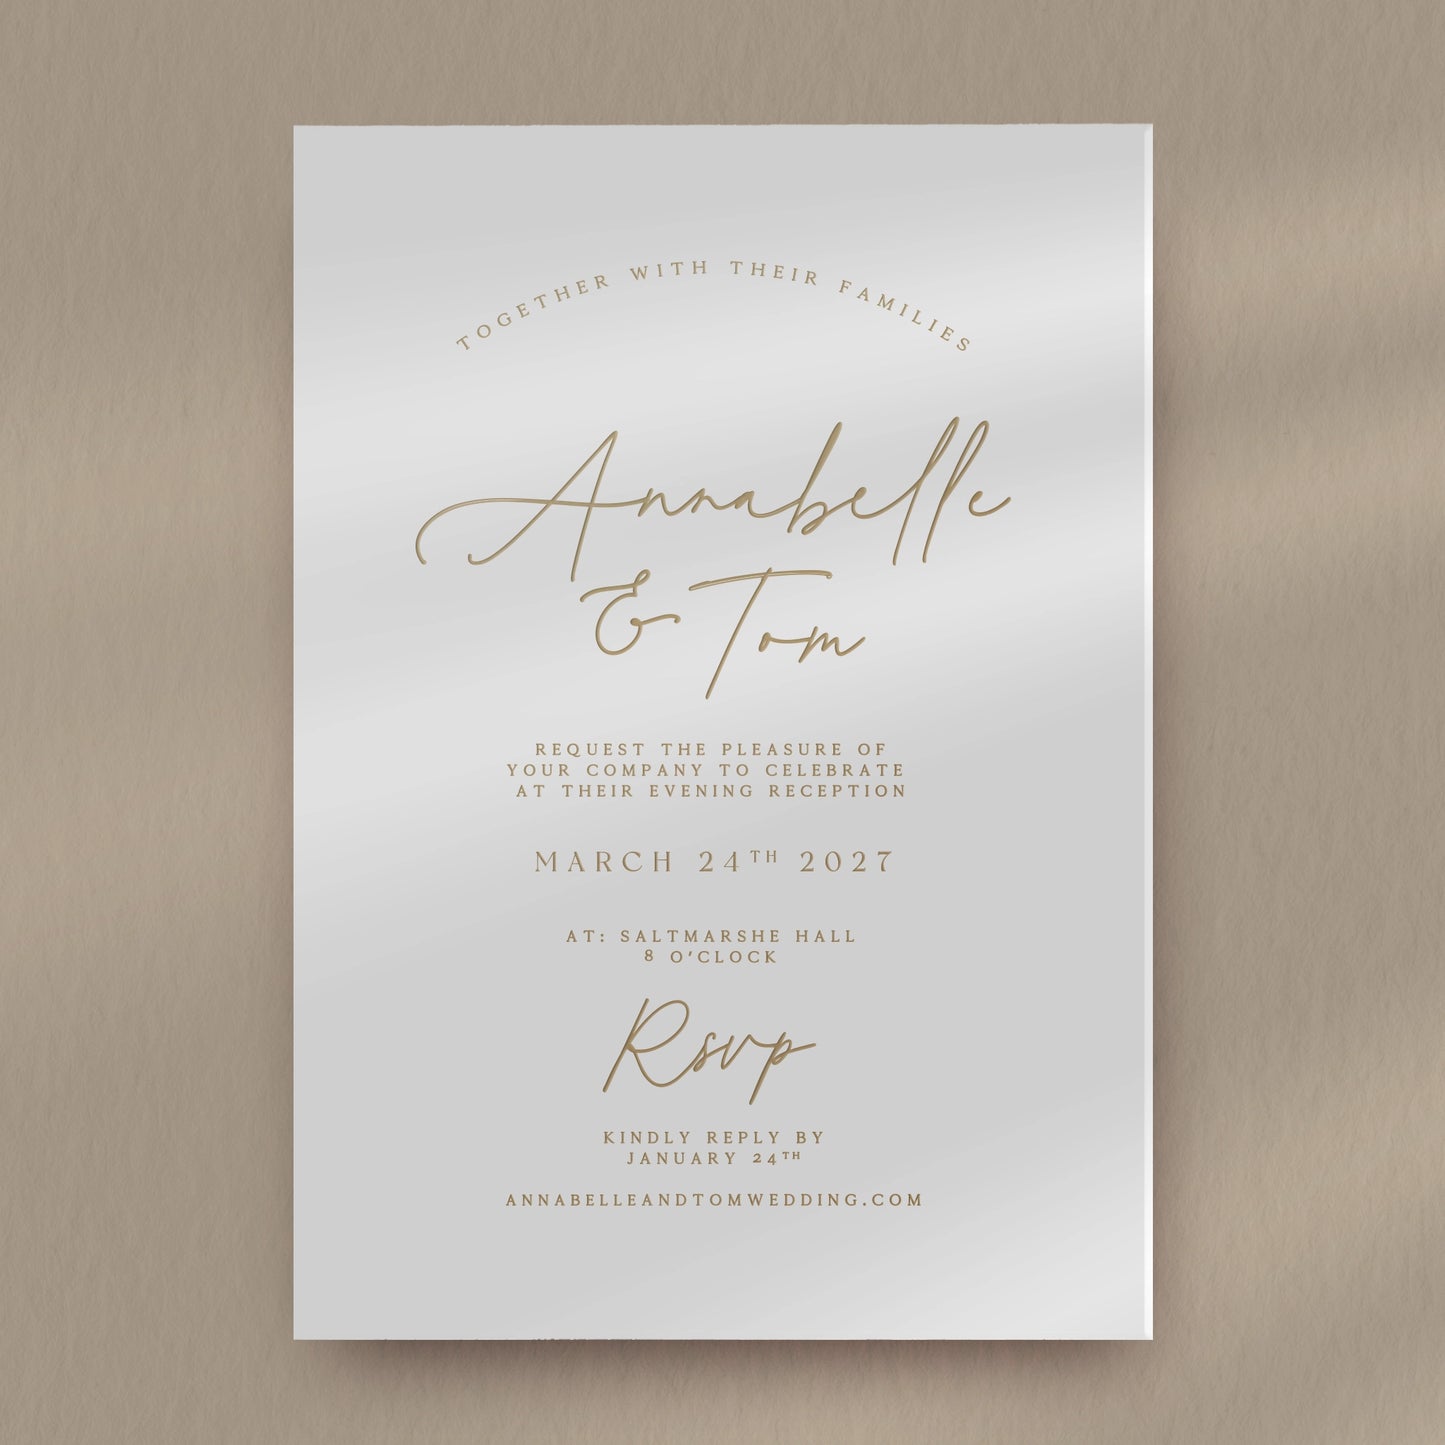 Evening Invitation Sample  Ivy and Gold Wedding Stationery Annabelle  